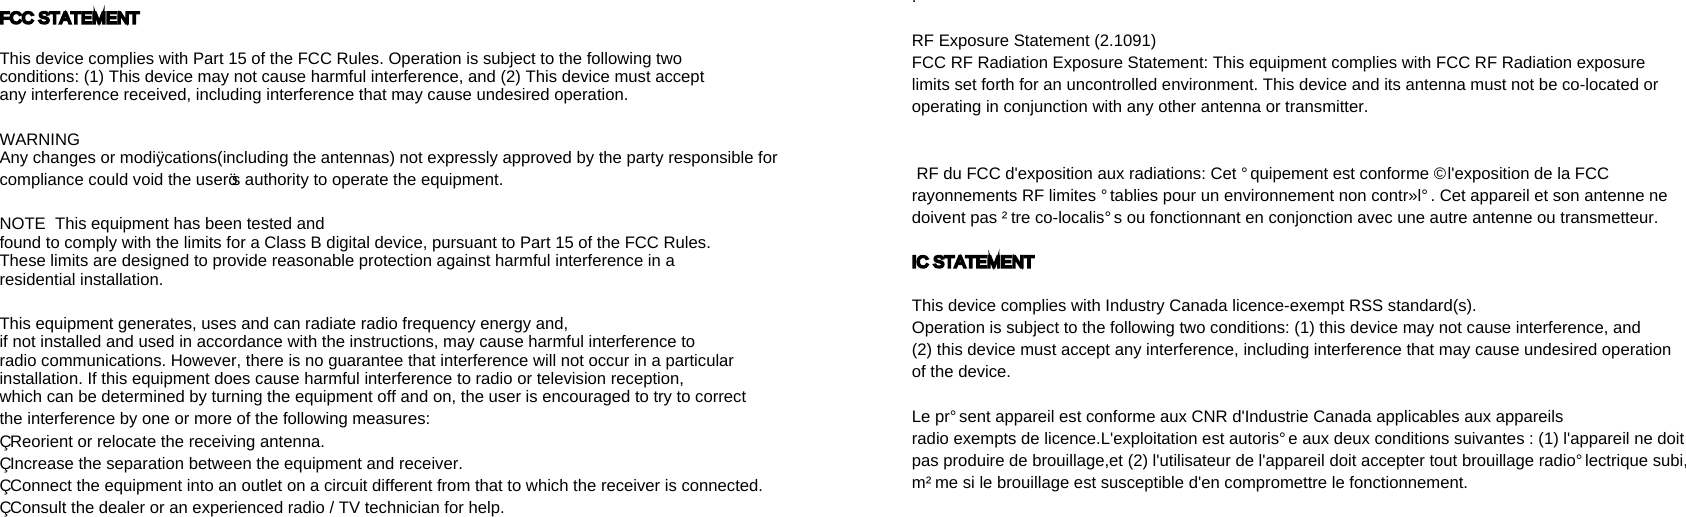 FCC STATEMENT This device complies with Part 15 of the FCC Rules. Operation is subject to the following two conditions: (1) This device may not cause harmful interference, and (2) This device must accept any interference received, including interference that may cause undesired operation.  WARNING  Any changes or modiﬁcations(including the antennas) not expressly approved by the party responsible for compliance could void the user’s authority to operate the equipment.  NOTE  This equipment has been tested and found to comply with the limits for a Class B digital device, pursuant to Part 15 of the FCC Rules. These limits are designed to provide reasonable protection against harmful interference in a residential installation. This equipment generates, uses and can radiate radio frequency energy and, if not installed and used in accordance with the instructions, may cause harmful interference to radio communications. However, there is no guarantee that interference will not occur in a particular installation. If this equipment does cause harmful interference to radio or television reception, which can be determined by turning the equipment off and on, the user is encouraged to try to correct the interference by one or more of the following measures: • Reorient or relocate the receiving antenna.• Increase the separation between the equipment and receiver.• Connect the equipment into an outlet on a circuit different from that to which the receiver is connected. • Consult the dealer or an experienced radio / TV technician for help.   . RF Exposure Statement (2.1091)  FCC RF Radiation Exposure Statement: This equipment complies with FCC RF Radiation exposure limits set forth for an uncontrolled environment. This device and its antenna must not be colocated or operating in conjunction with any other antenna or transmitter.   RF du FCC d&apos;exposition aux radiations: Cet équipement est conforme à l&apos;exposition de la FCC rayonnements RF limites établies pour un environnement non contrôlé. Cet appareil et son antenne ne doivent pas être colocalisés ou fonctionnant en conjonction avec une autre antenne ou transmetteur.  IC STATEMENT  This device complies with Industry Canada licenceexempt RSS standard(s).Operation is subject to the following two conditions: (1) this device may not cause interference, and (2) this device must accept any interference, including interference that may cause undesired operation of the device.  Le présent appareil est conforme aux CNR d&apos;Industrie Canada applicables aux appareils radio exempts de licence.L&apos;exploitation est autorisée aux deux conditions suivantes : (1) l&apos;appareil ne doit pas produire de brouillage,et (2) l&apos;utilisateur de l&apos;appareil doit accepter tout brouillage radioélectrique subi, même si le brouillage est susceptible d&apos;en compromettre le fonctionnement.    